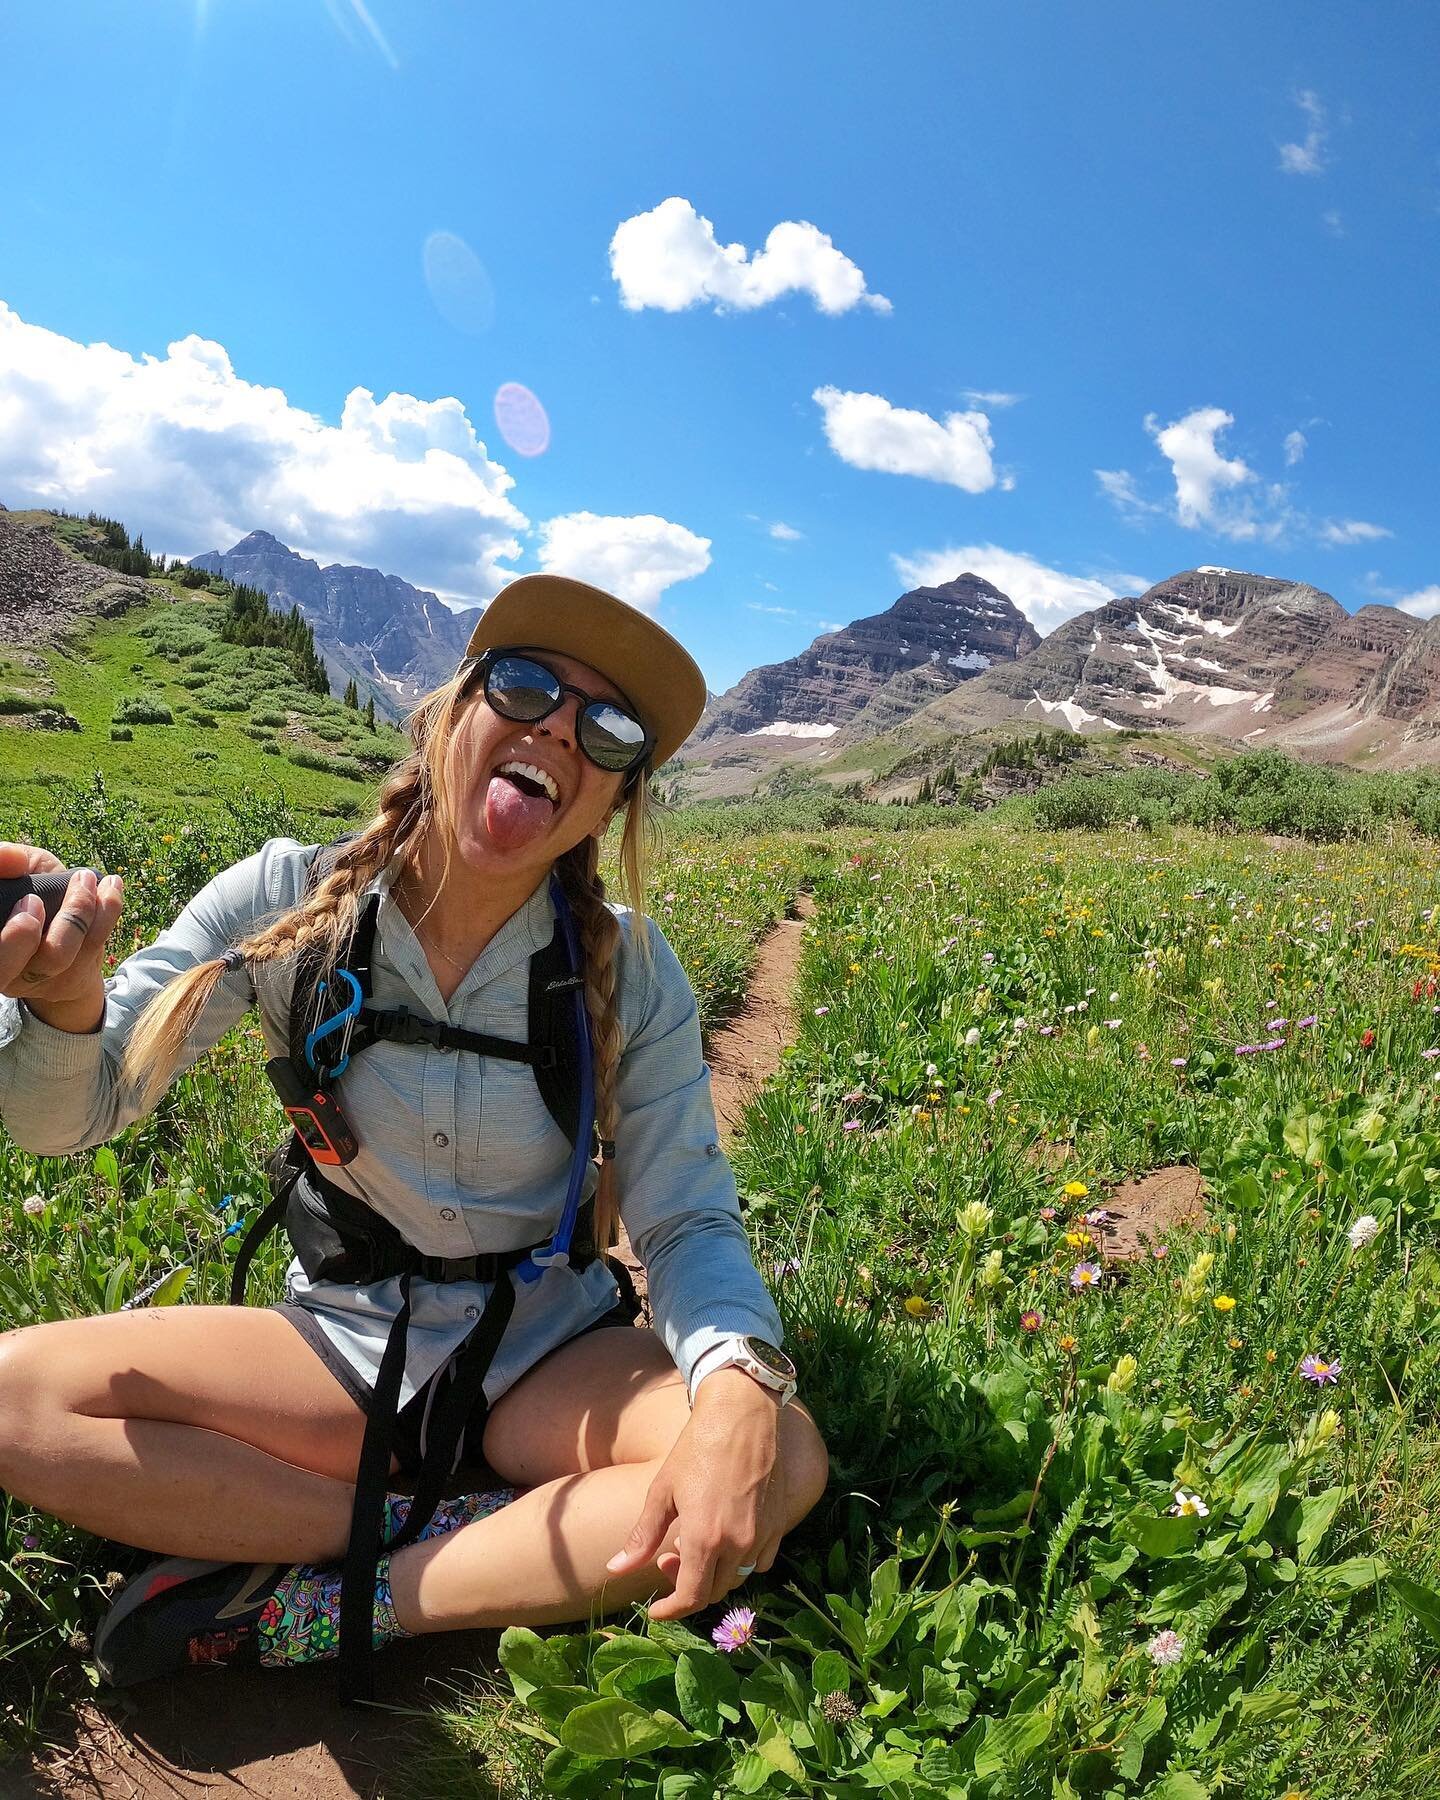 Last day of summer! I don&rsquo;t know about you but I feel like summer always goes so fast... While this summer wasn&rsquo;t what I expected, I still feel like I made some awesome memories. From training for the Tahoe Rim Trail to actually hiking it